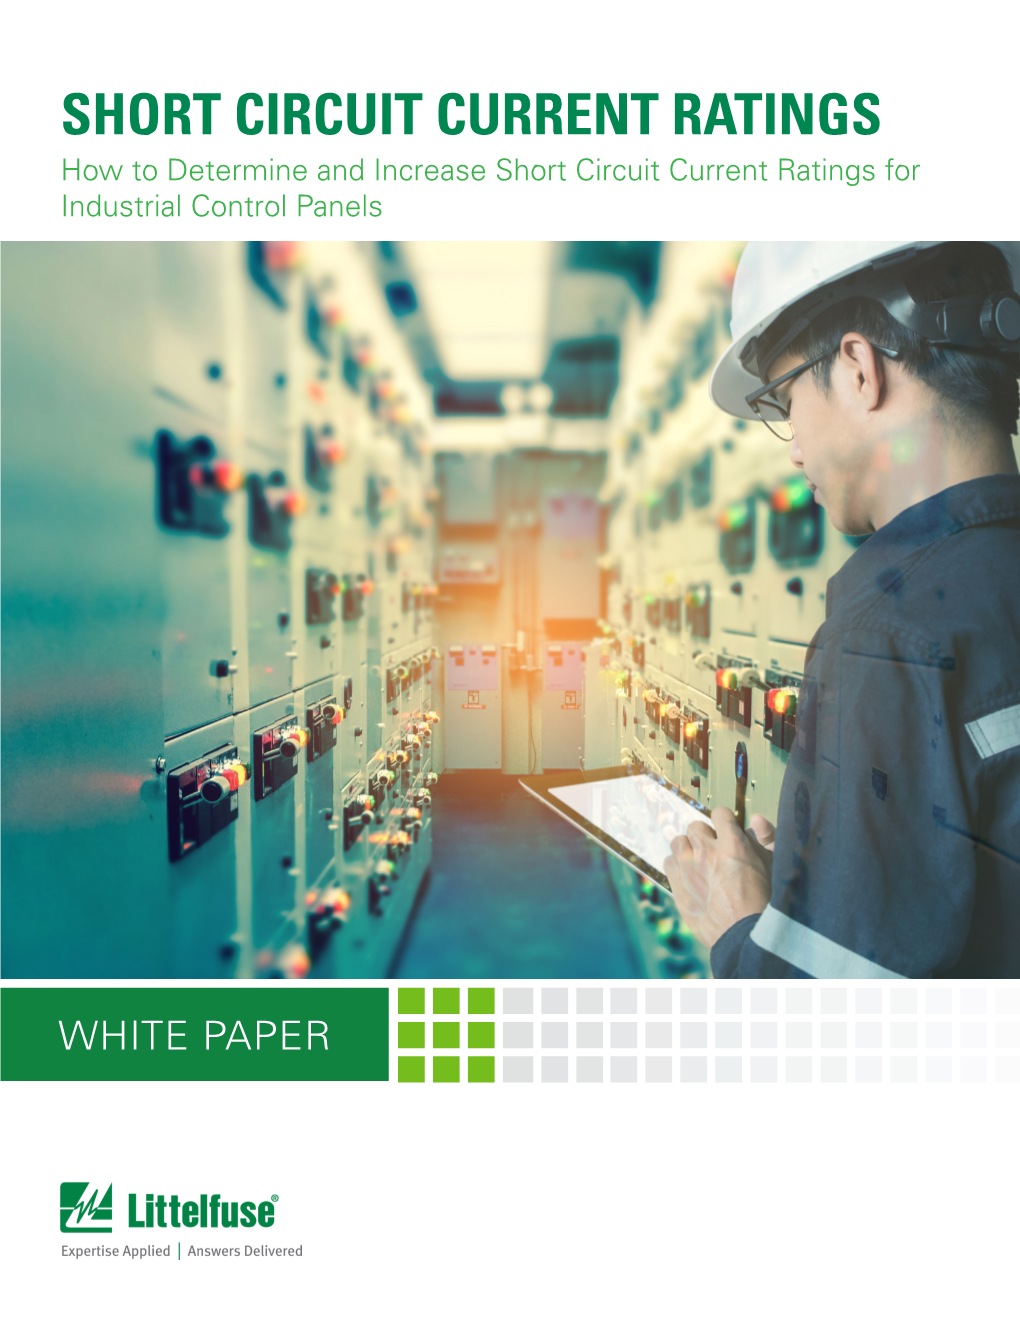 How to Determine and Increase Short Circuit Current Ratings for Industrial Control Panels